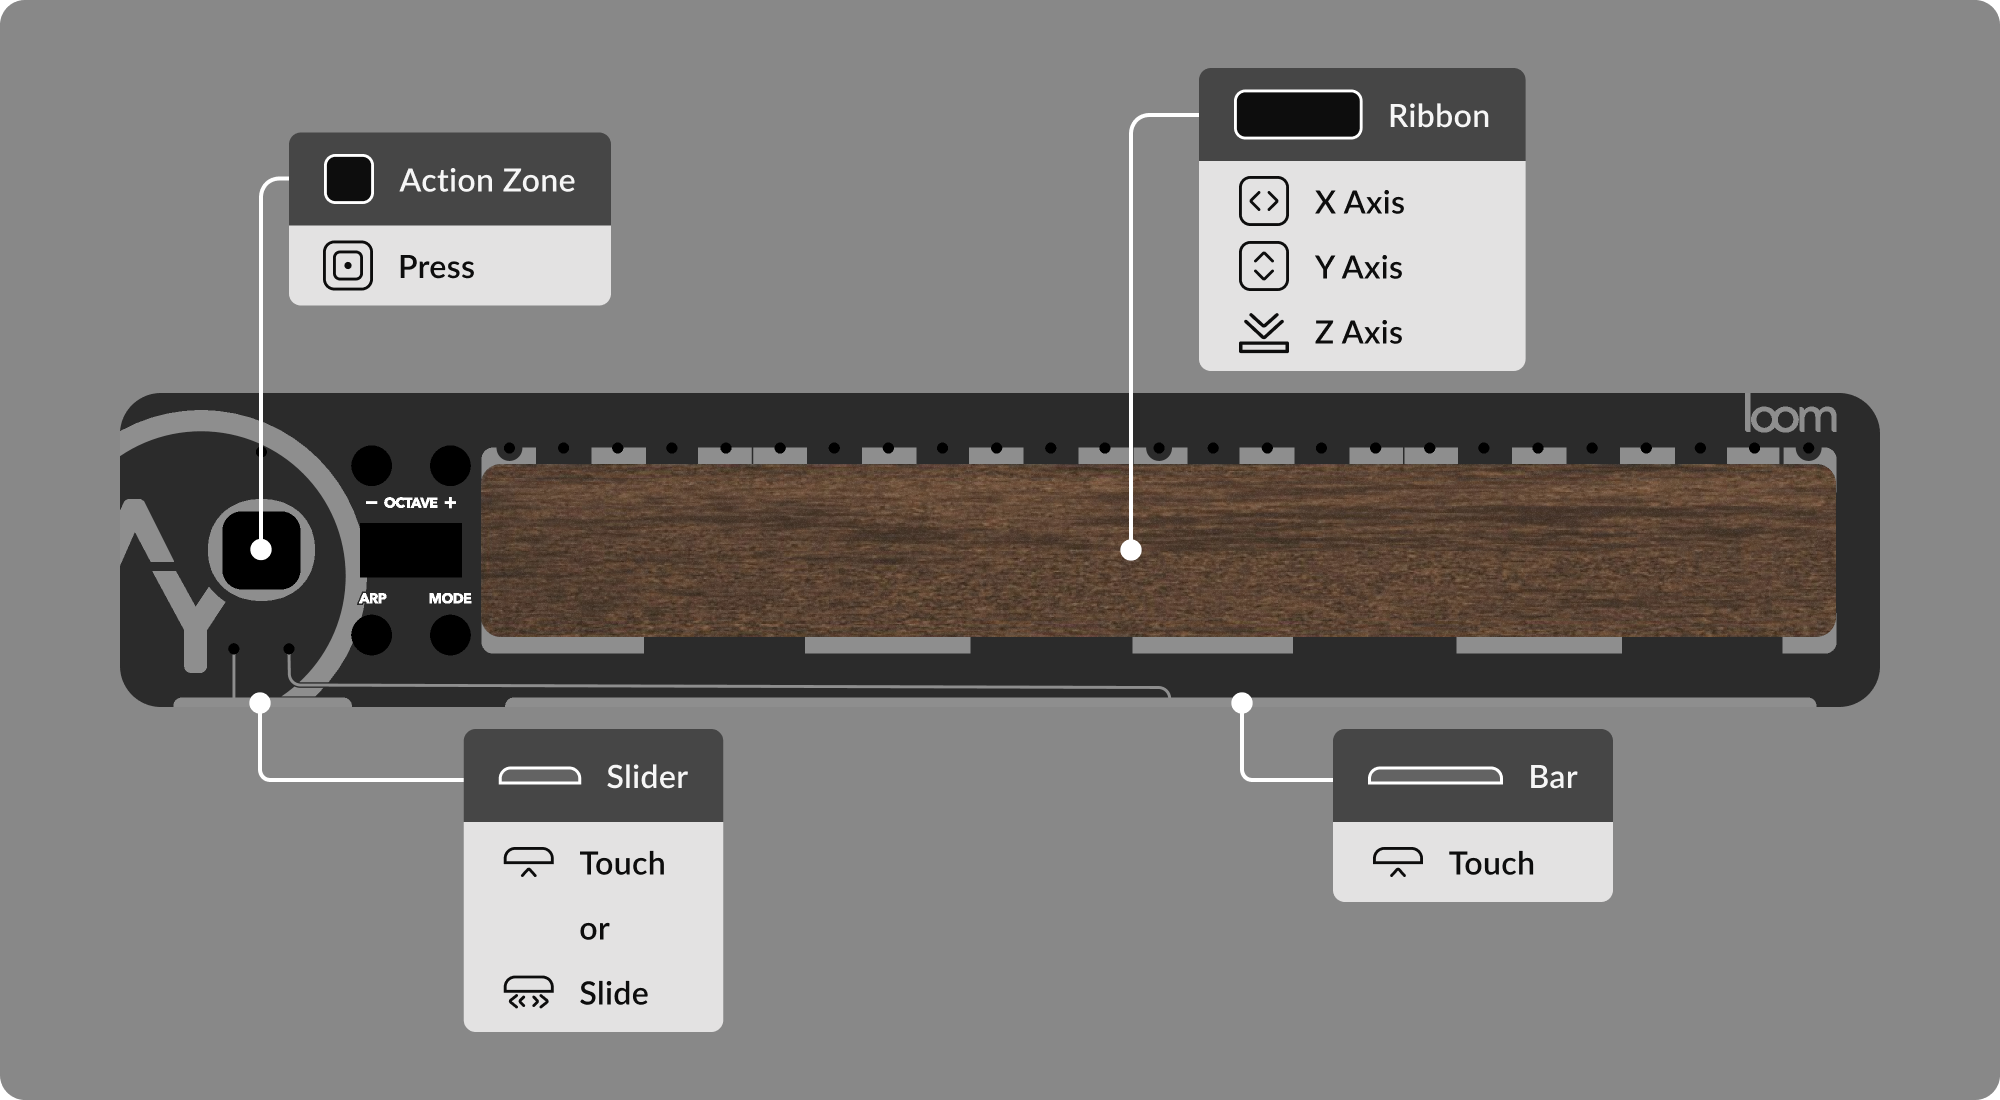 Overview of Loom's controls and surfaces.